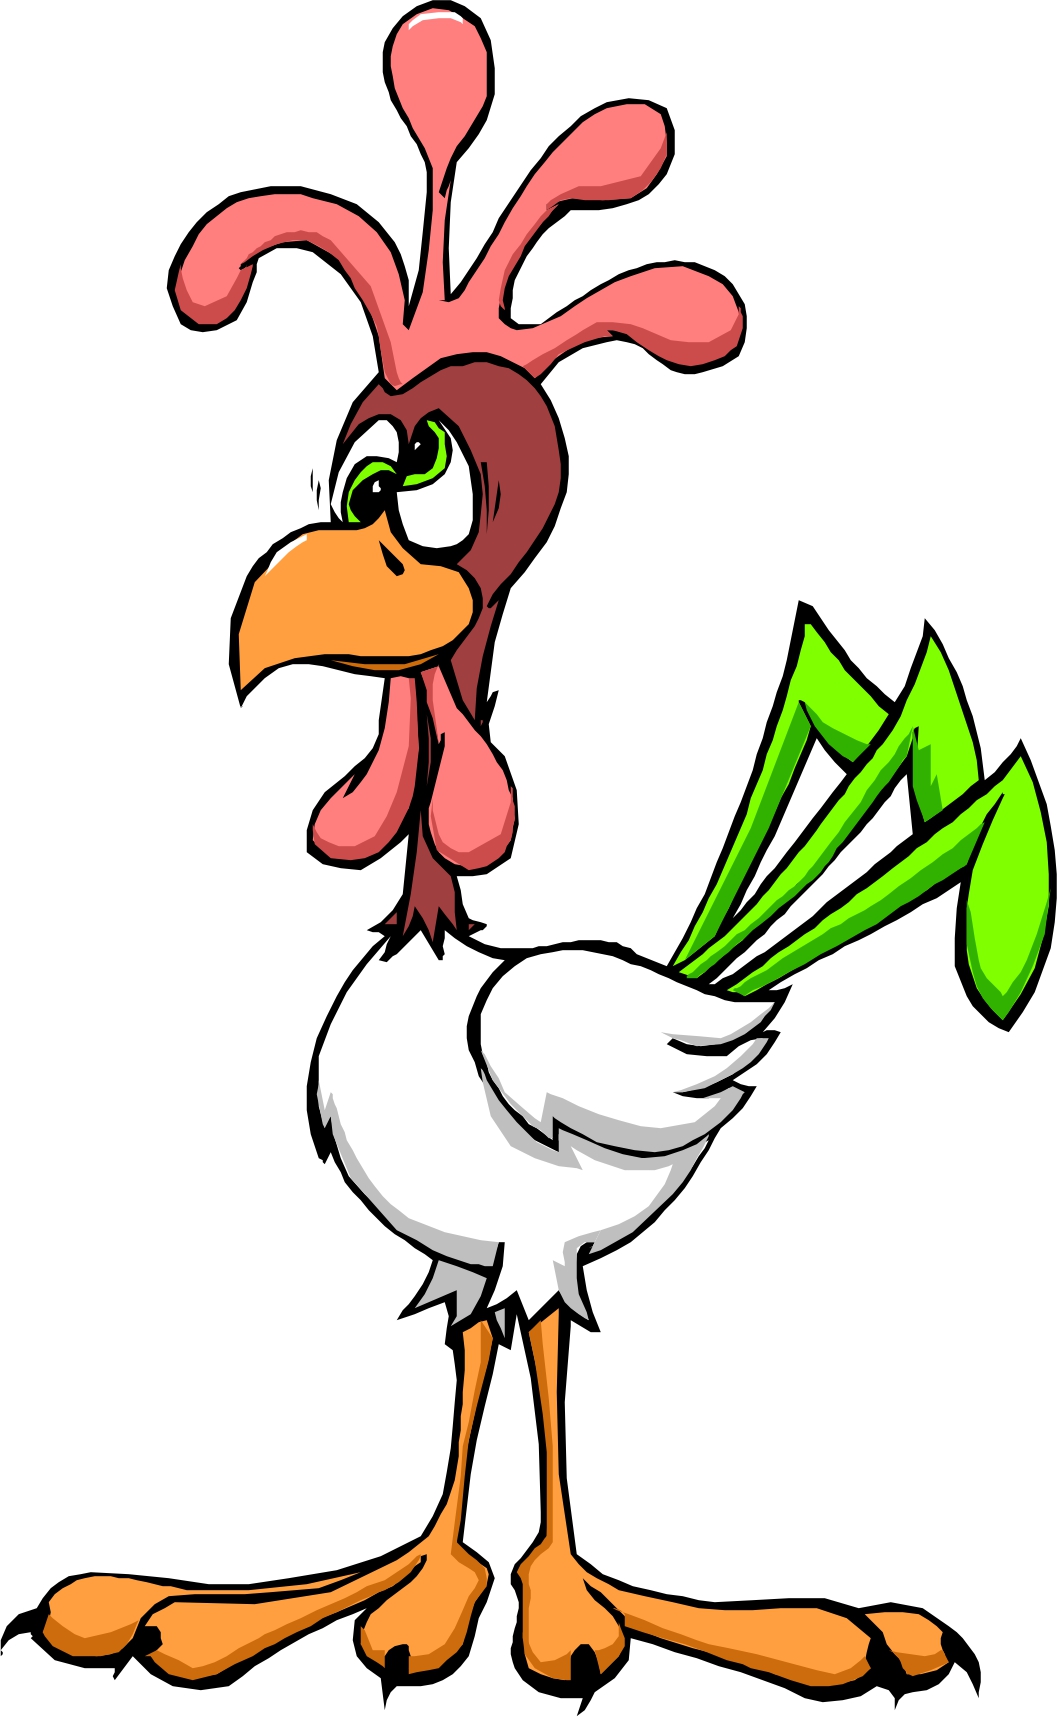 Clip Arts Related To : clipart chicken face. 